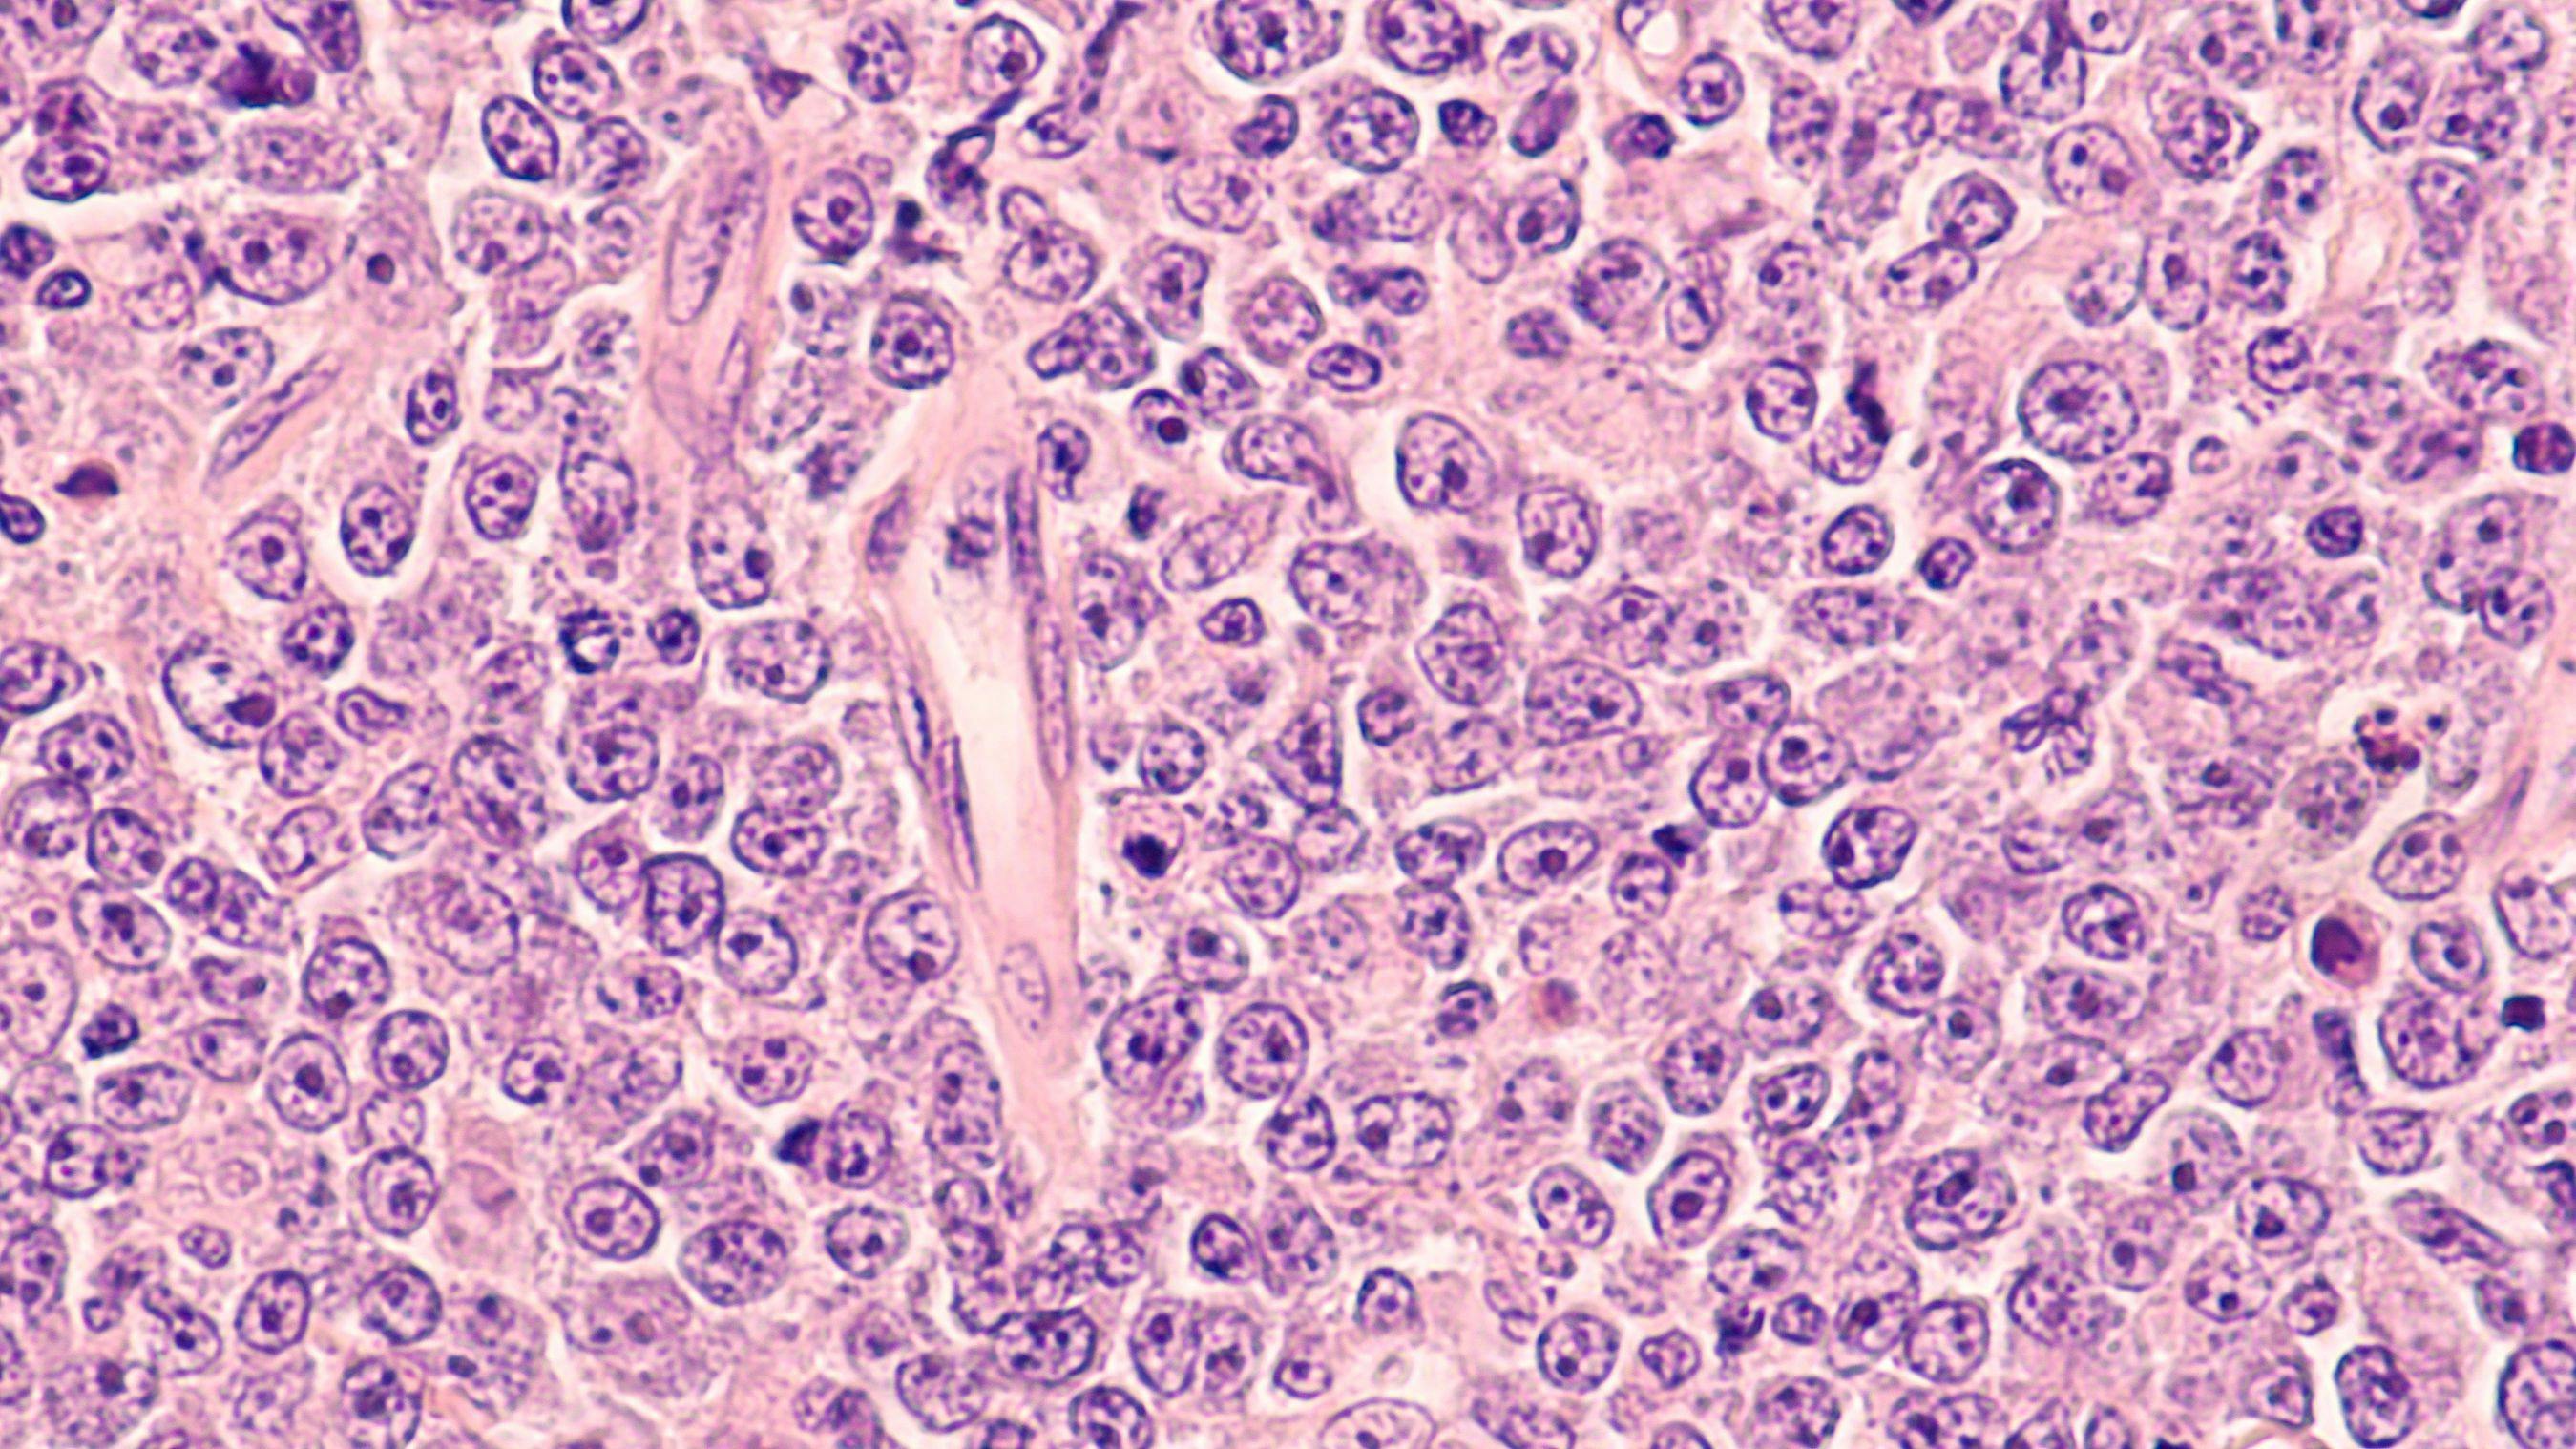 Lymphoma awareness: photomicrograph of a diffuse large B-cell lymphoma (DLBCL) a type of non-Hodgkin lymphoma. This case is from the testis of an elderly man and shows prominent nucleoli. Image Credit: © David A Litman - stock.adobe.com